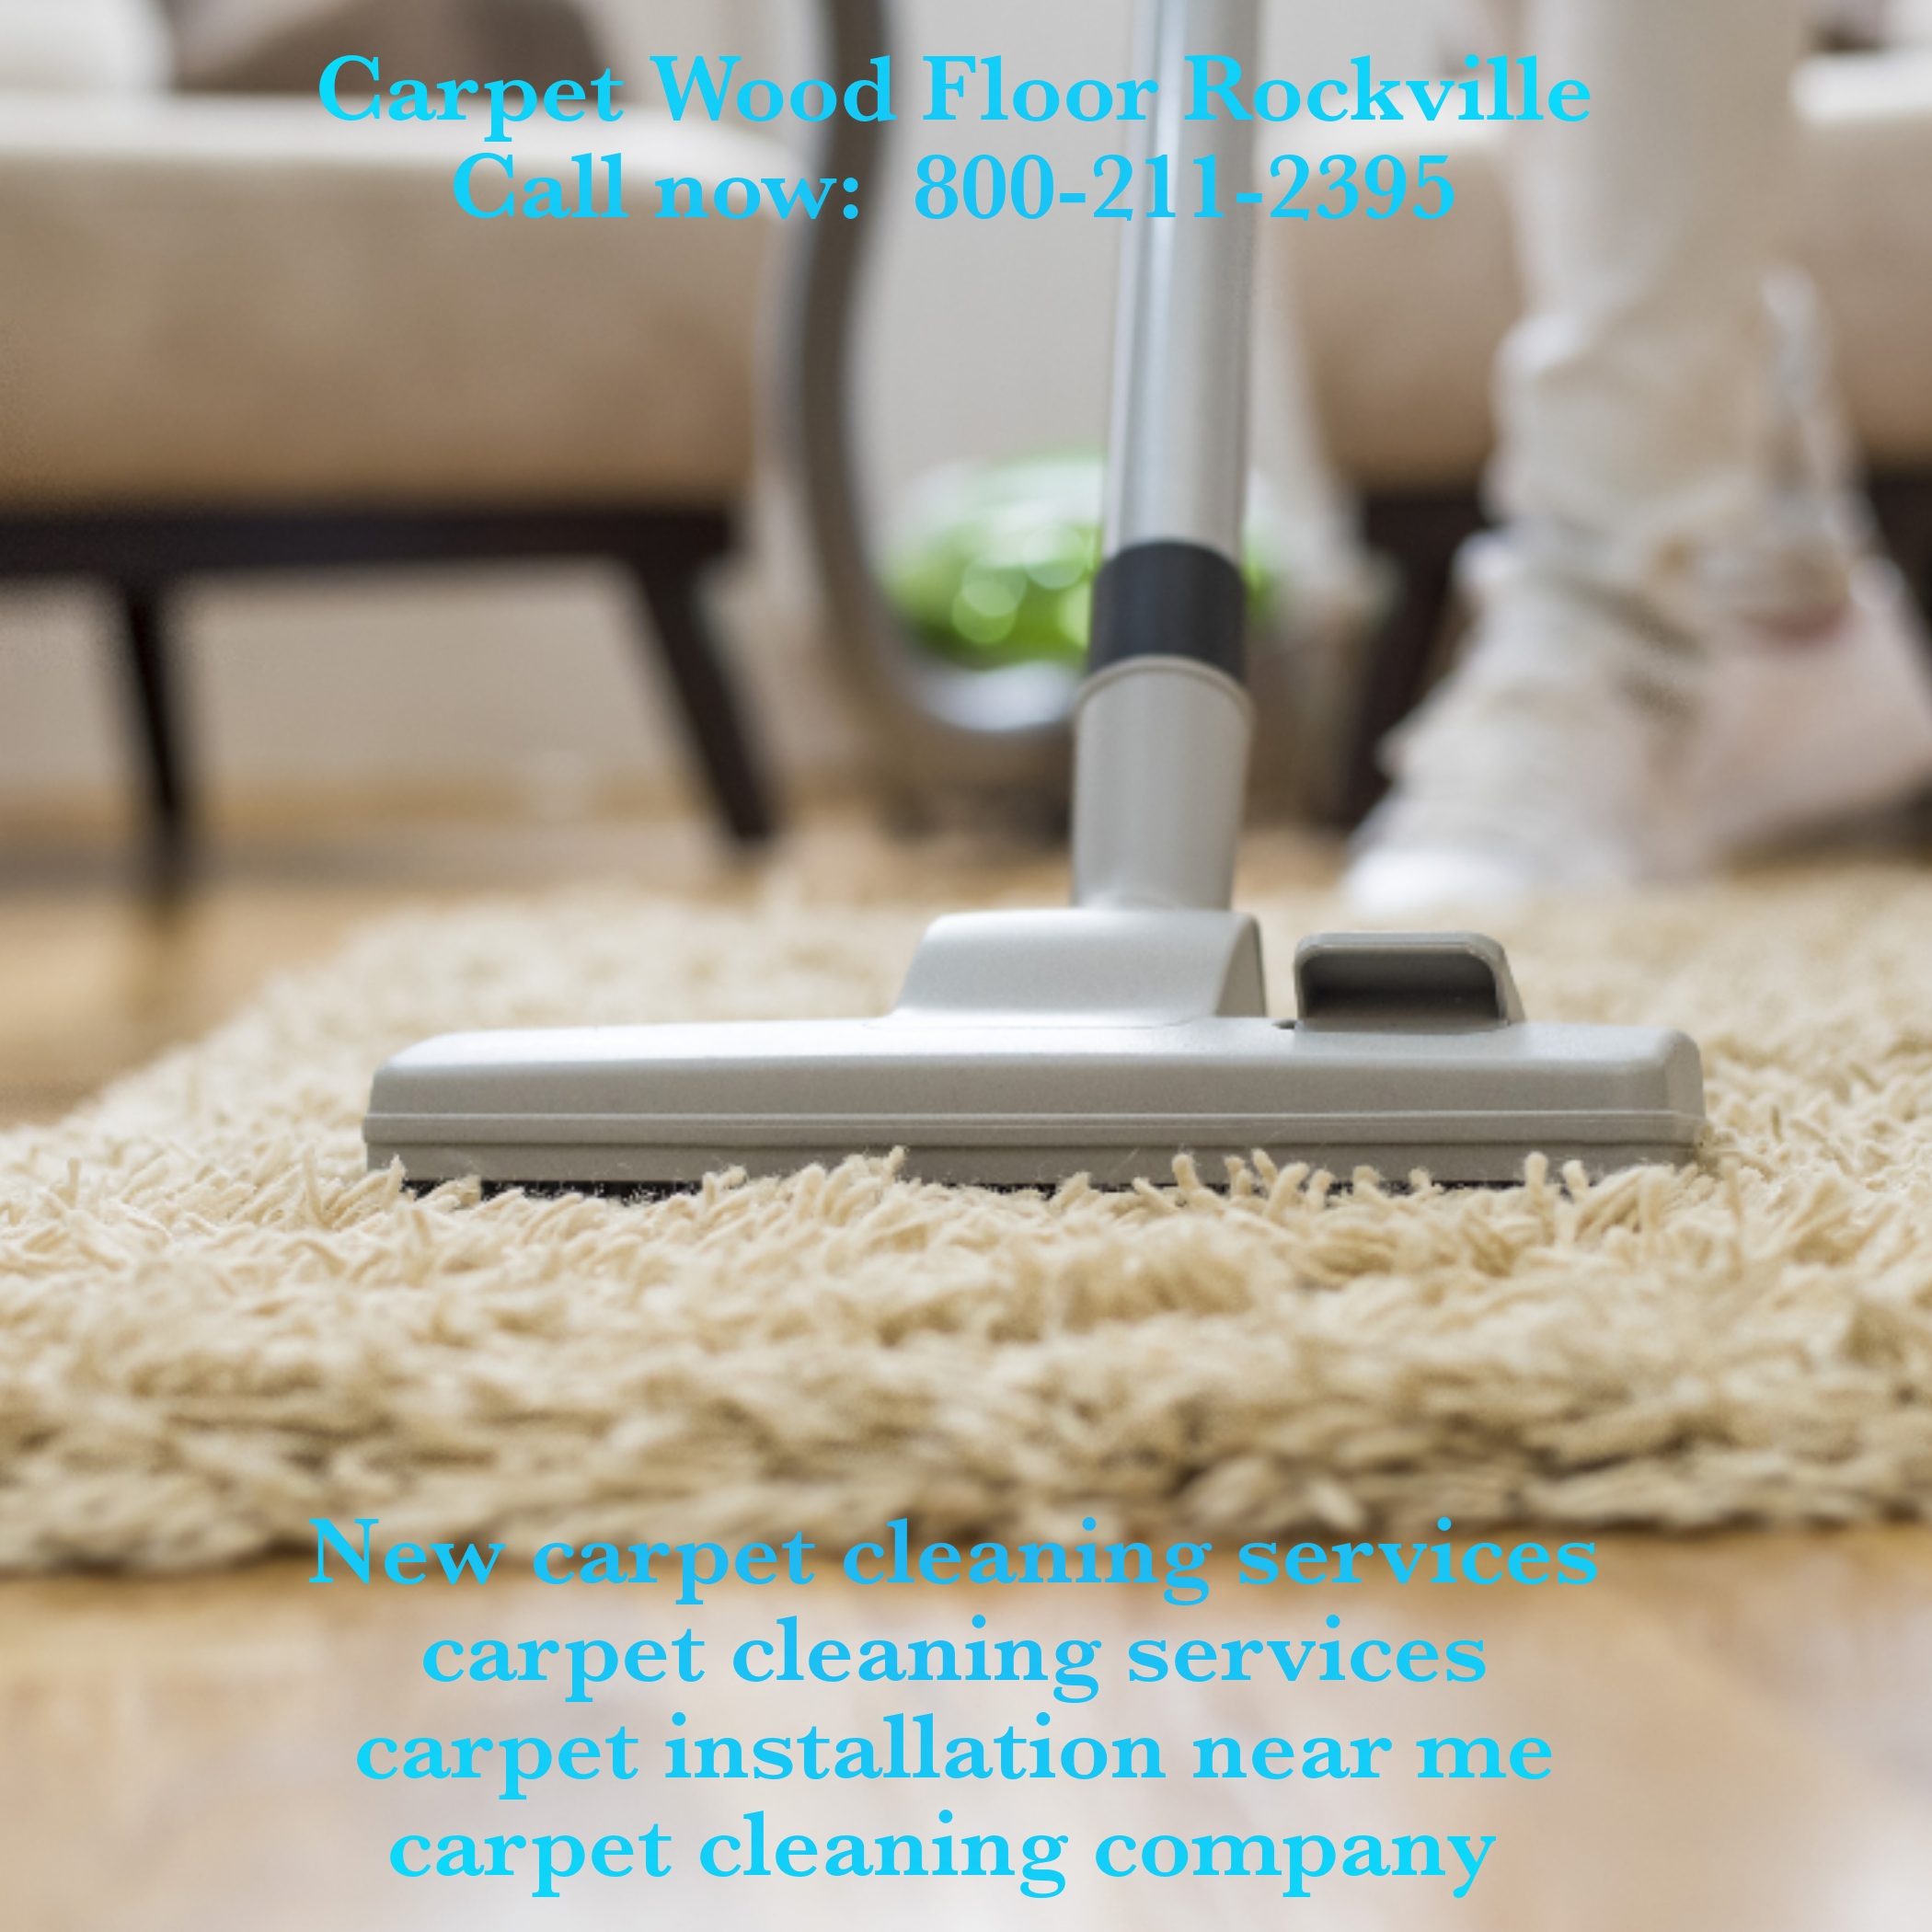 Get Utmost Benefits with Our Carpet Company